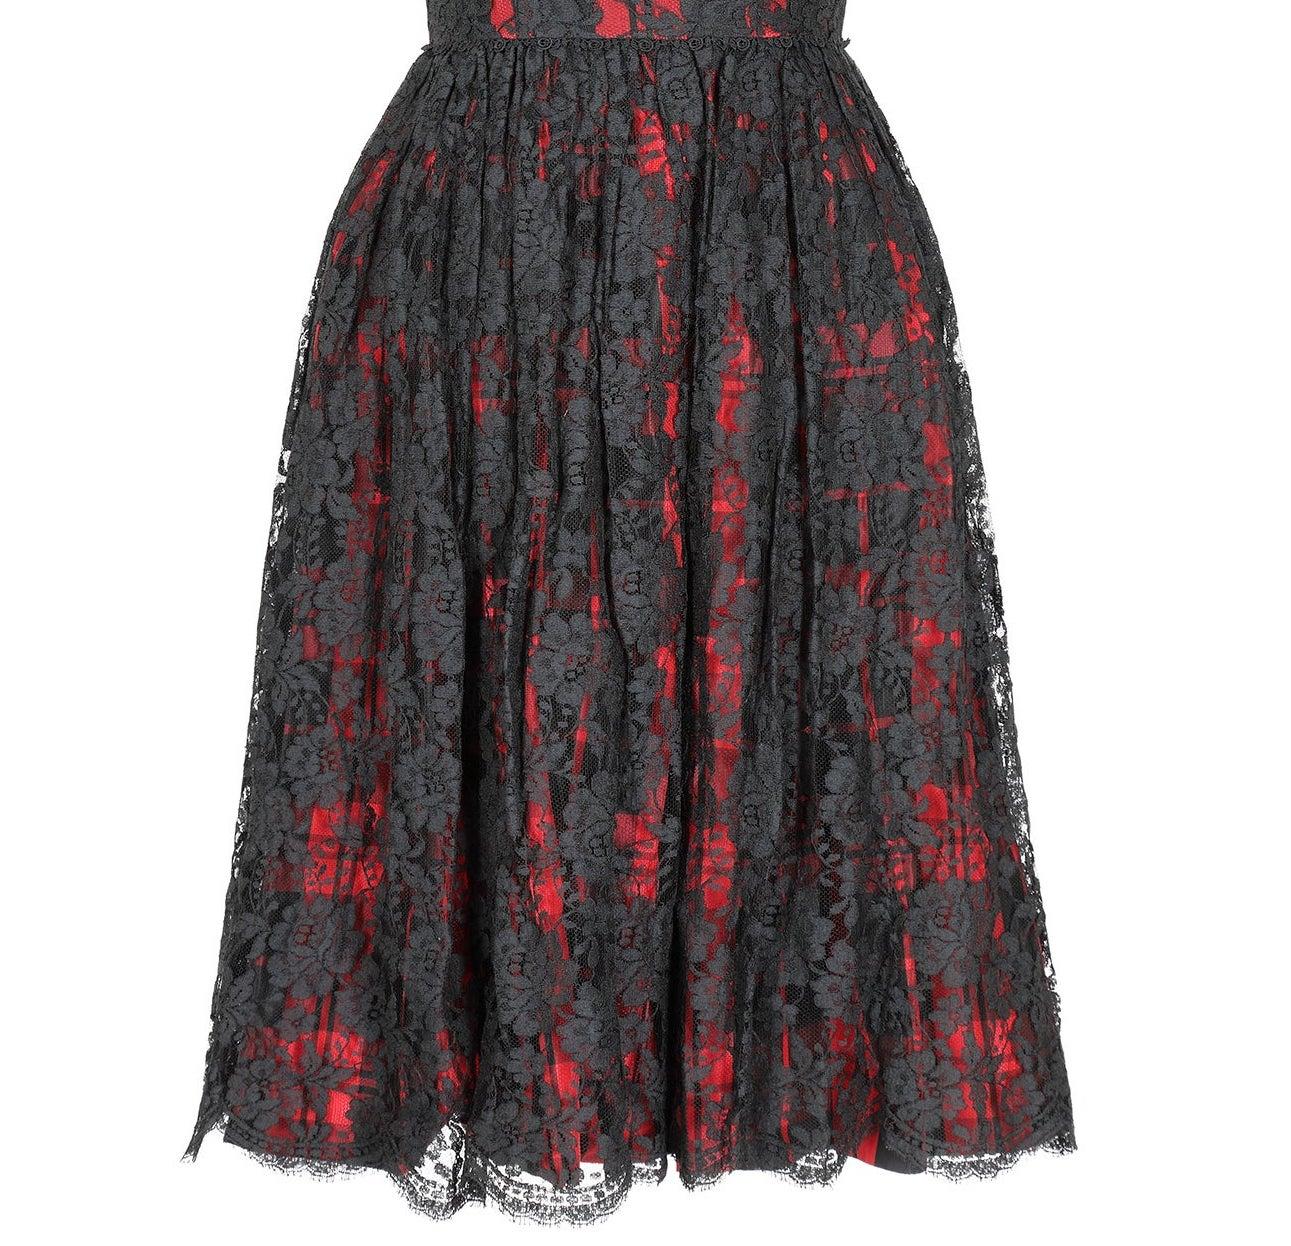 1960s Lang Originals Red & Black Lace Cocktail Dress In Excellent Condition For Sale In London, GB